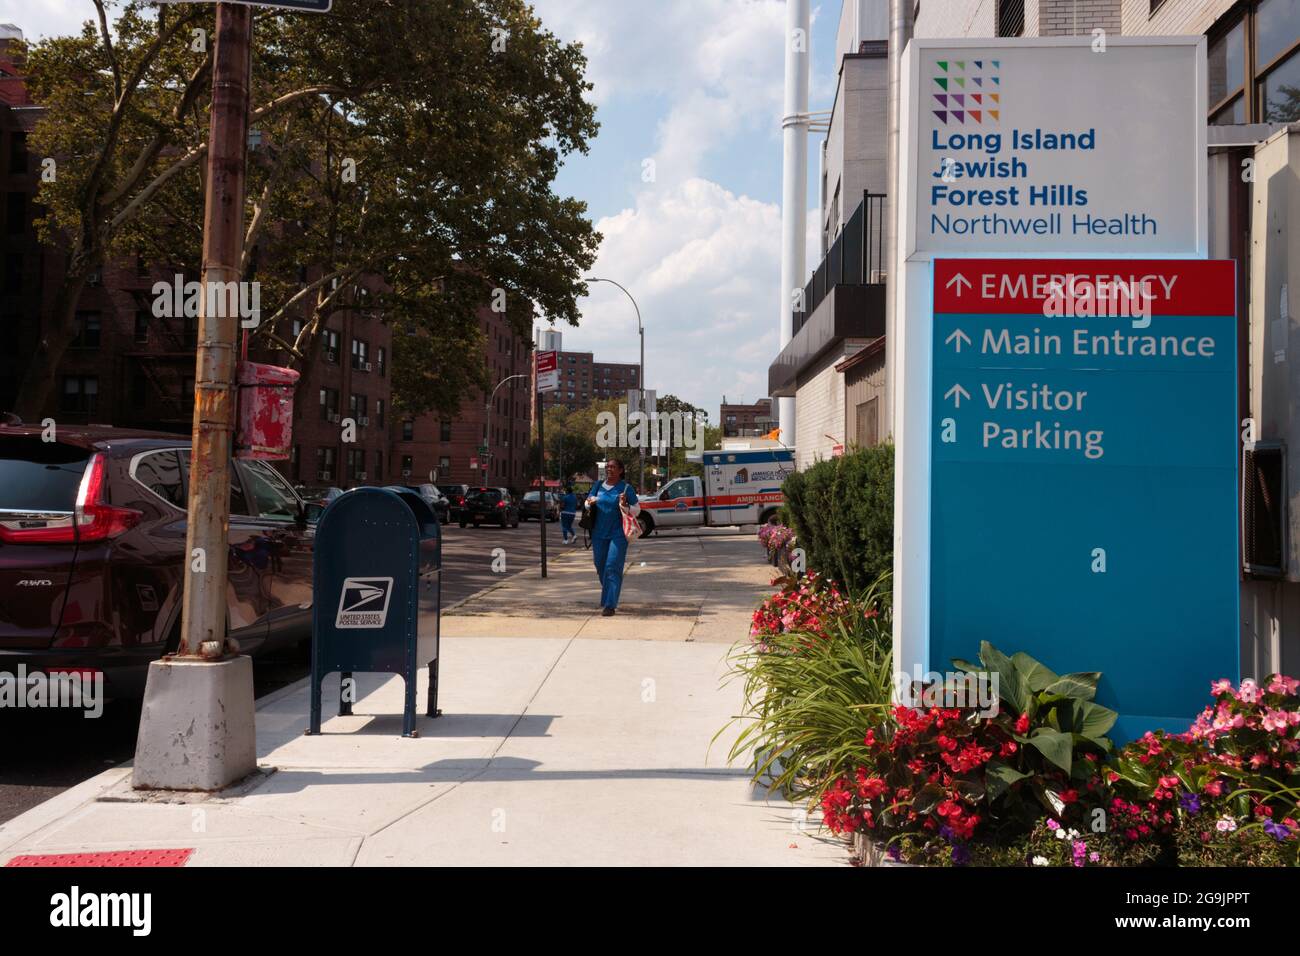 entrance to Long Island Jewish Forest HIlls Hospital at 66th ave. and 102nd st. in Forest HIlls, Queens, New York, a branch of the Norhtwell Health Stock Photo